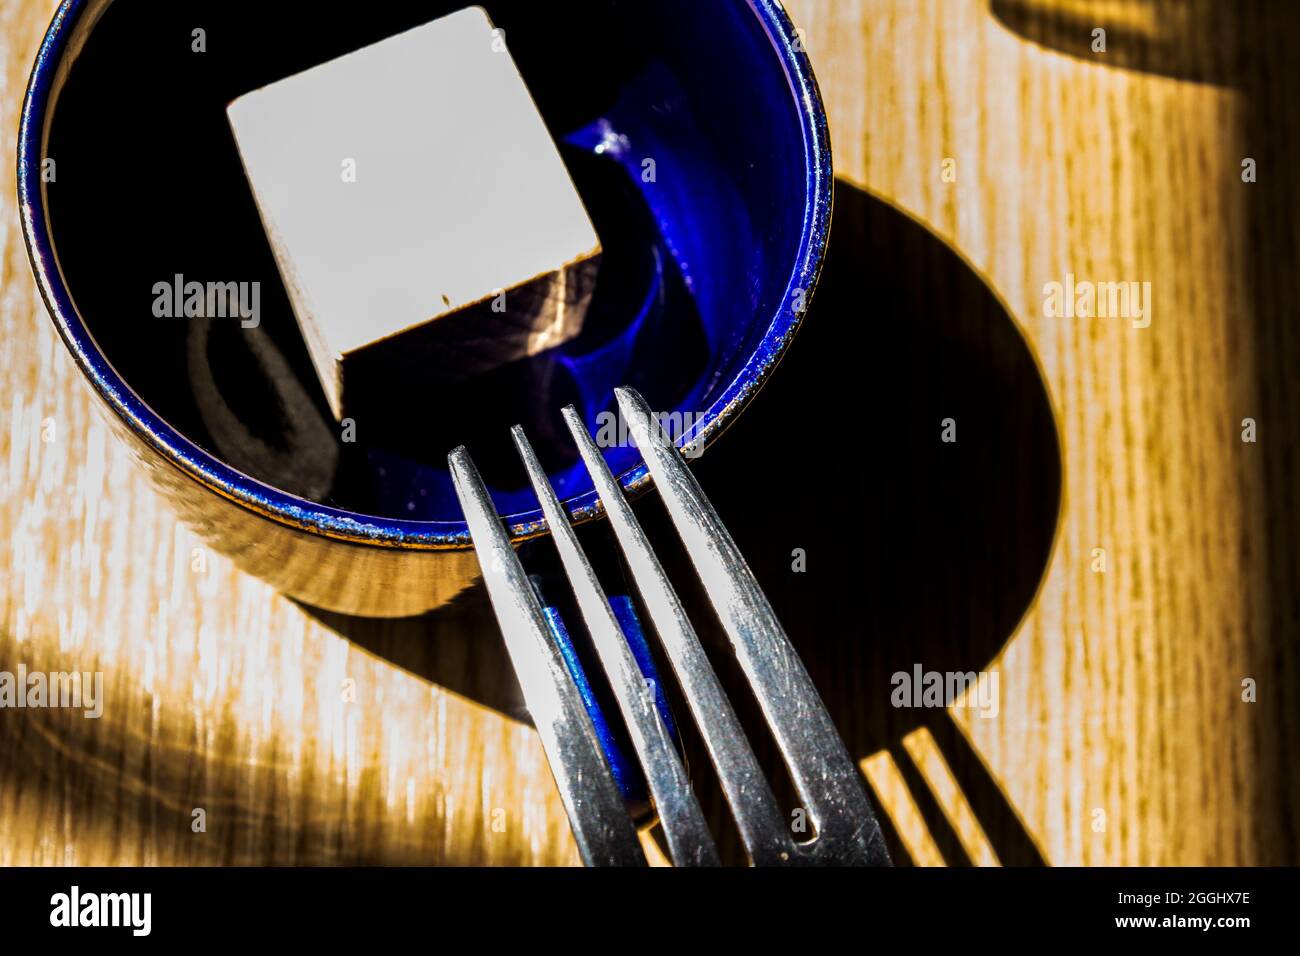 Abstract composition with a fork, a cup, a cube and a wooden table. Stock Photo